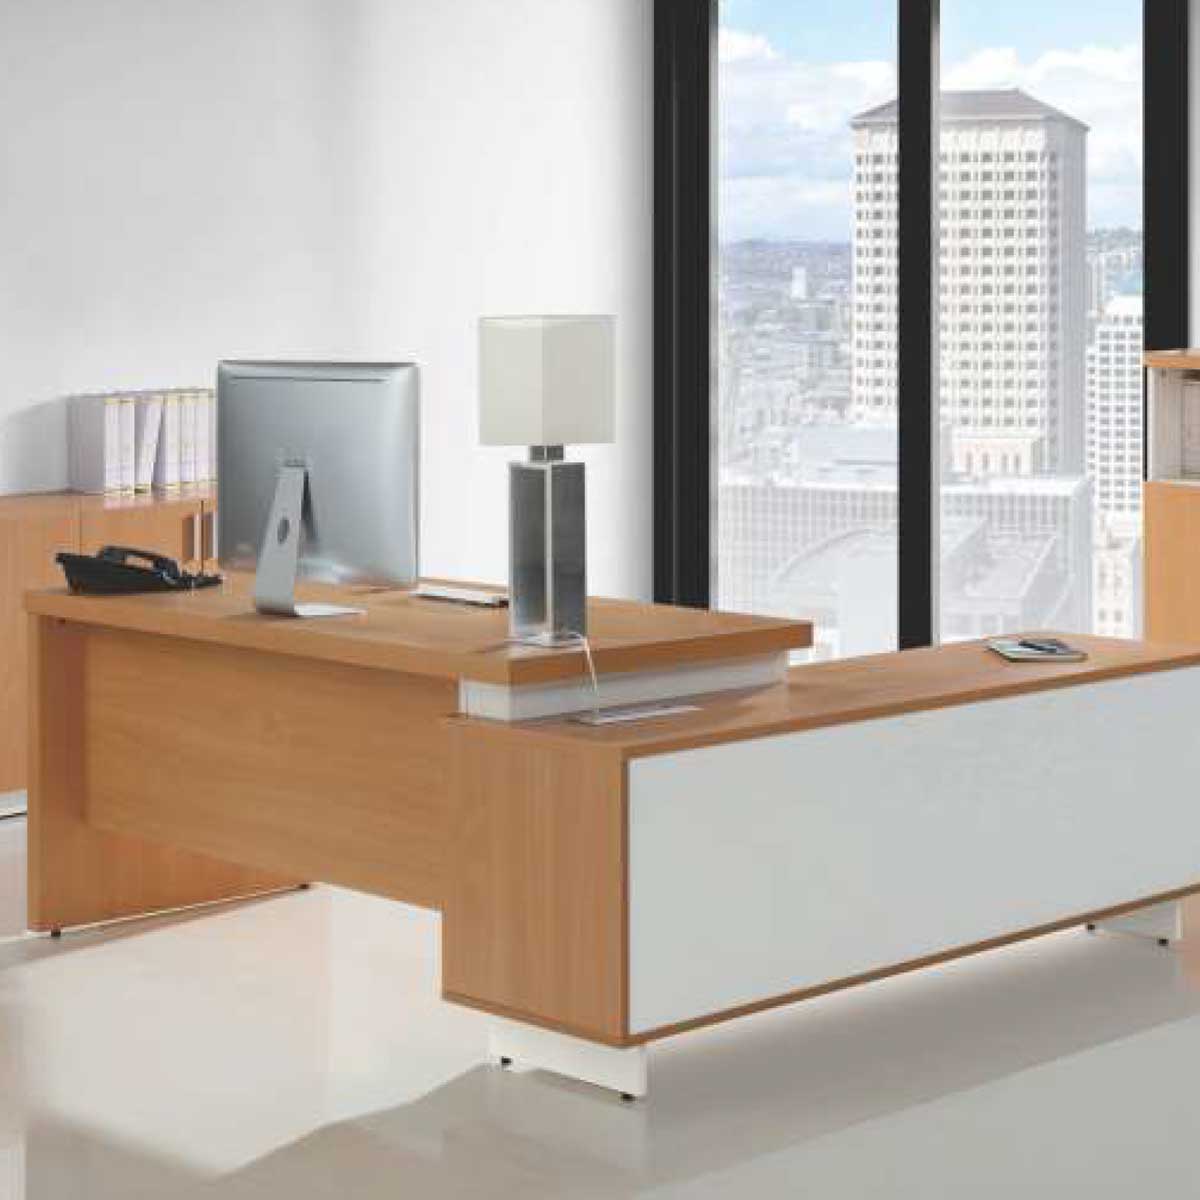 Boss Table Manufacturers, Suppliers in Noida Sector 49